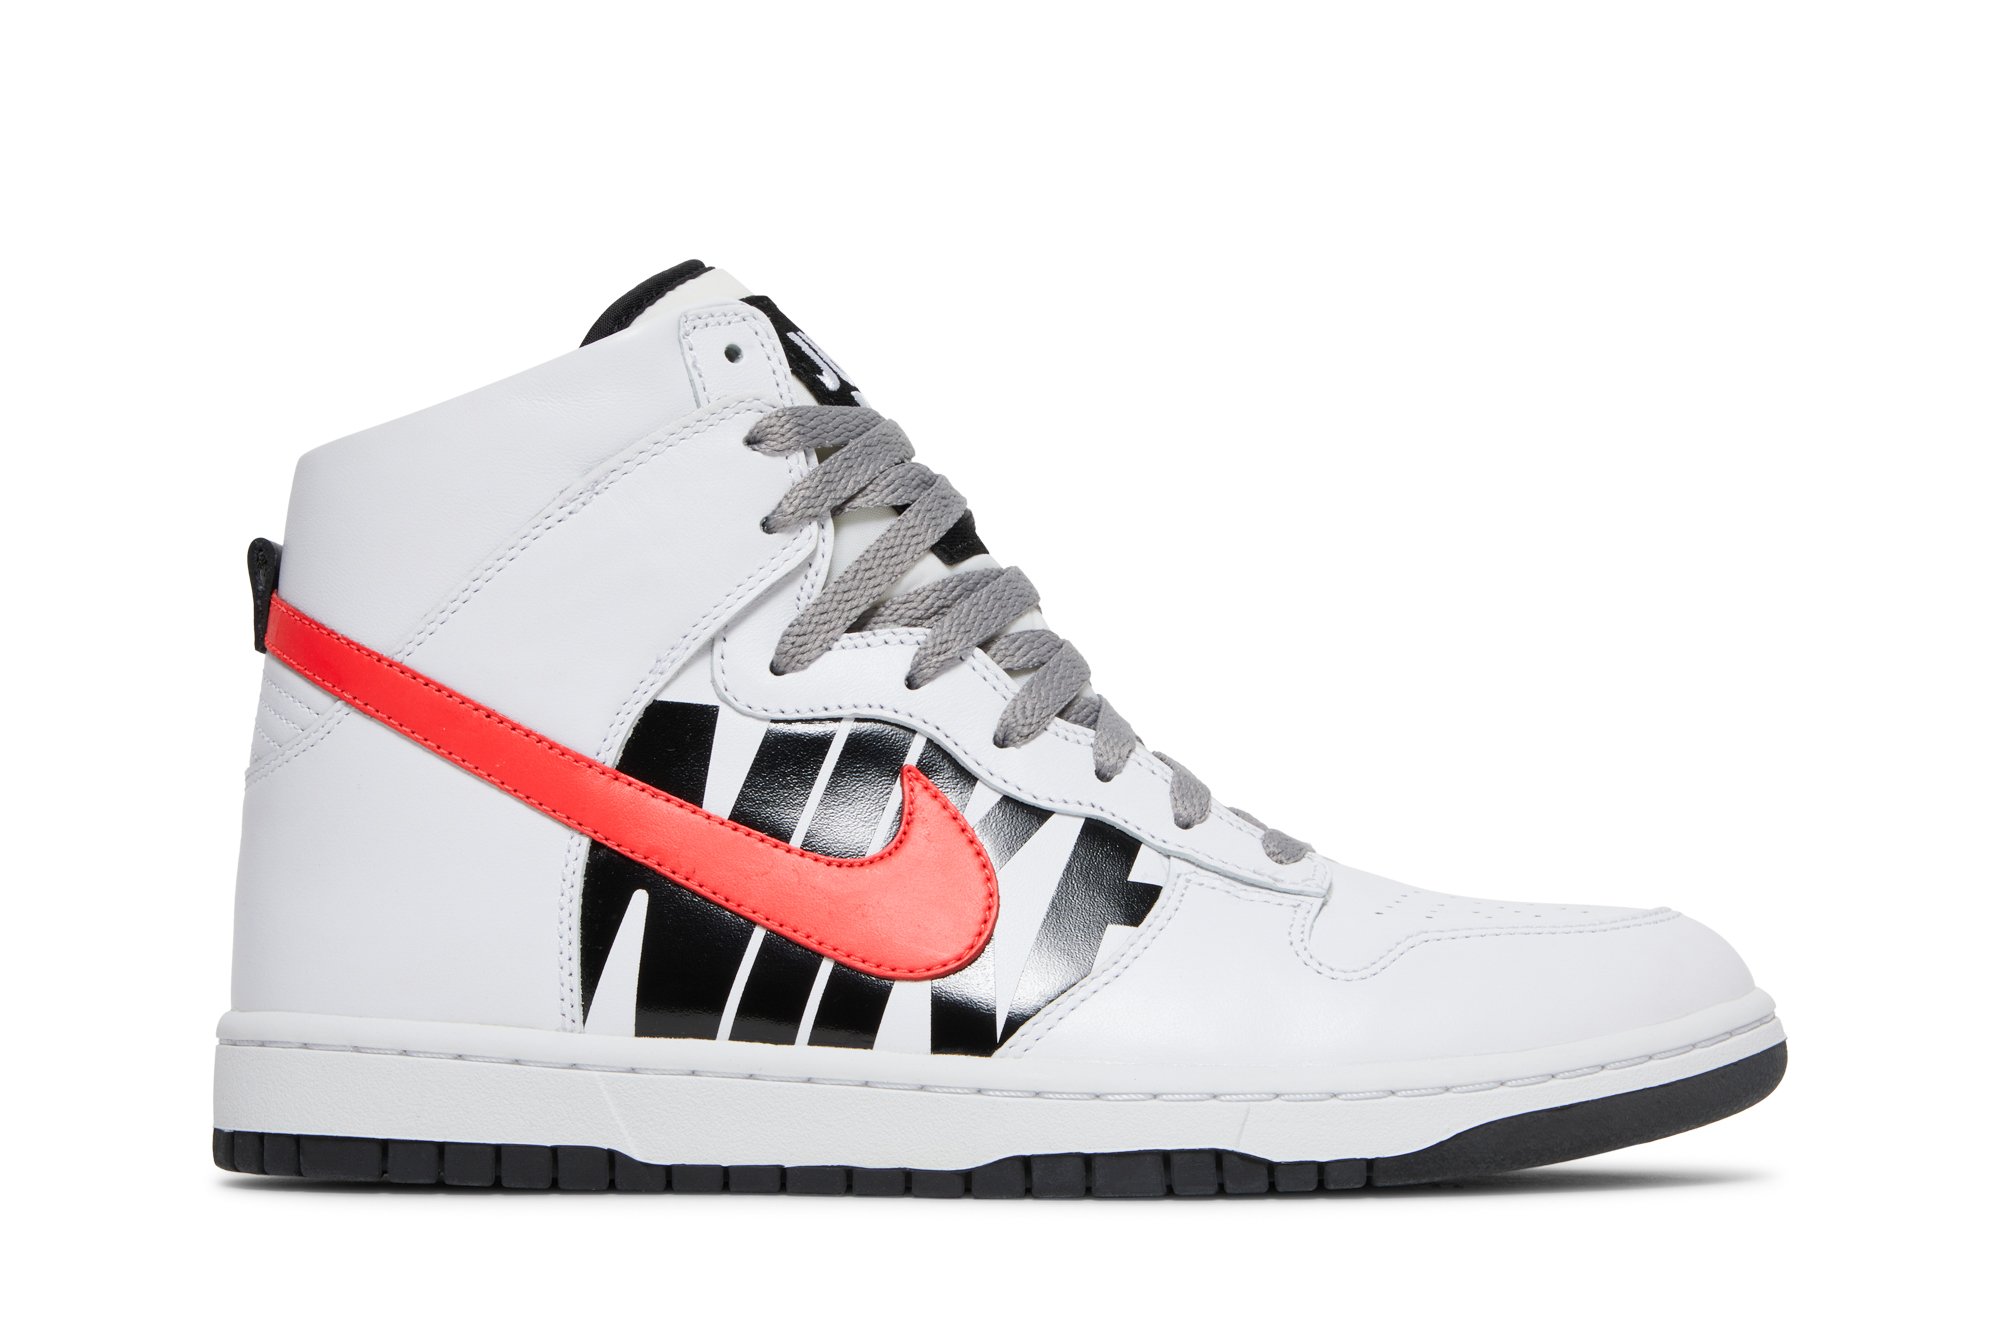 Buy UNDFTD x NikeLab Dunk High Lux 'Undefeated' - 826668 160 | GOAT